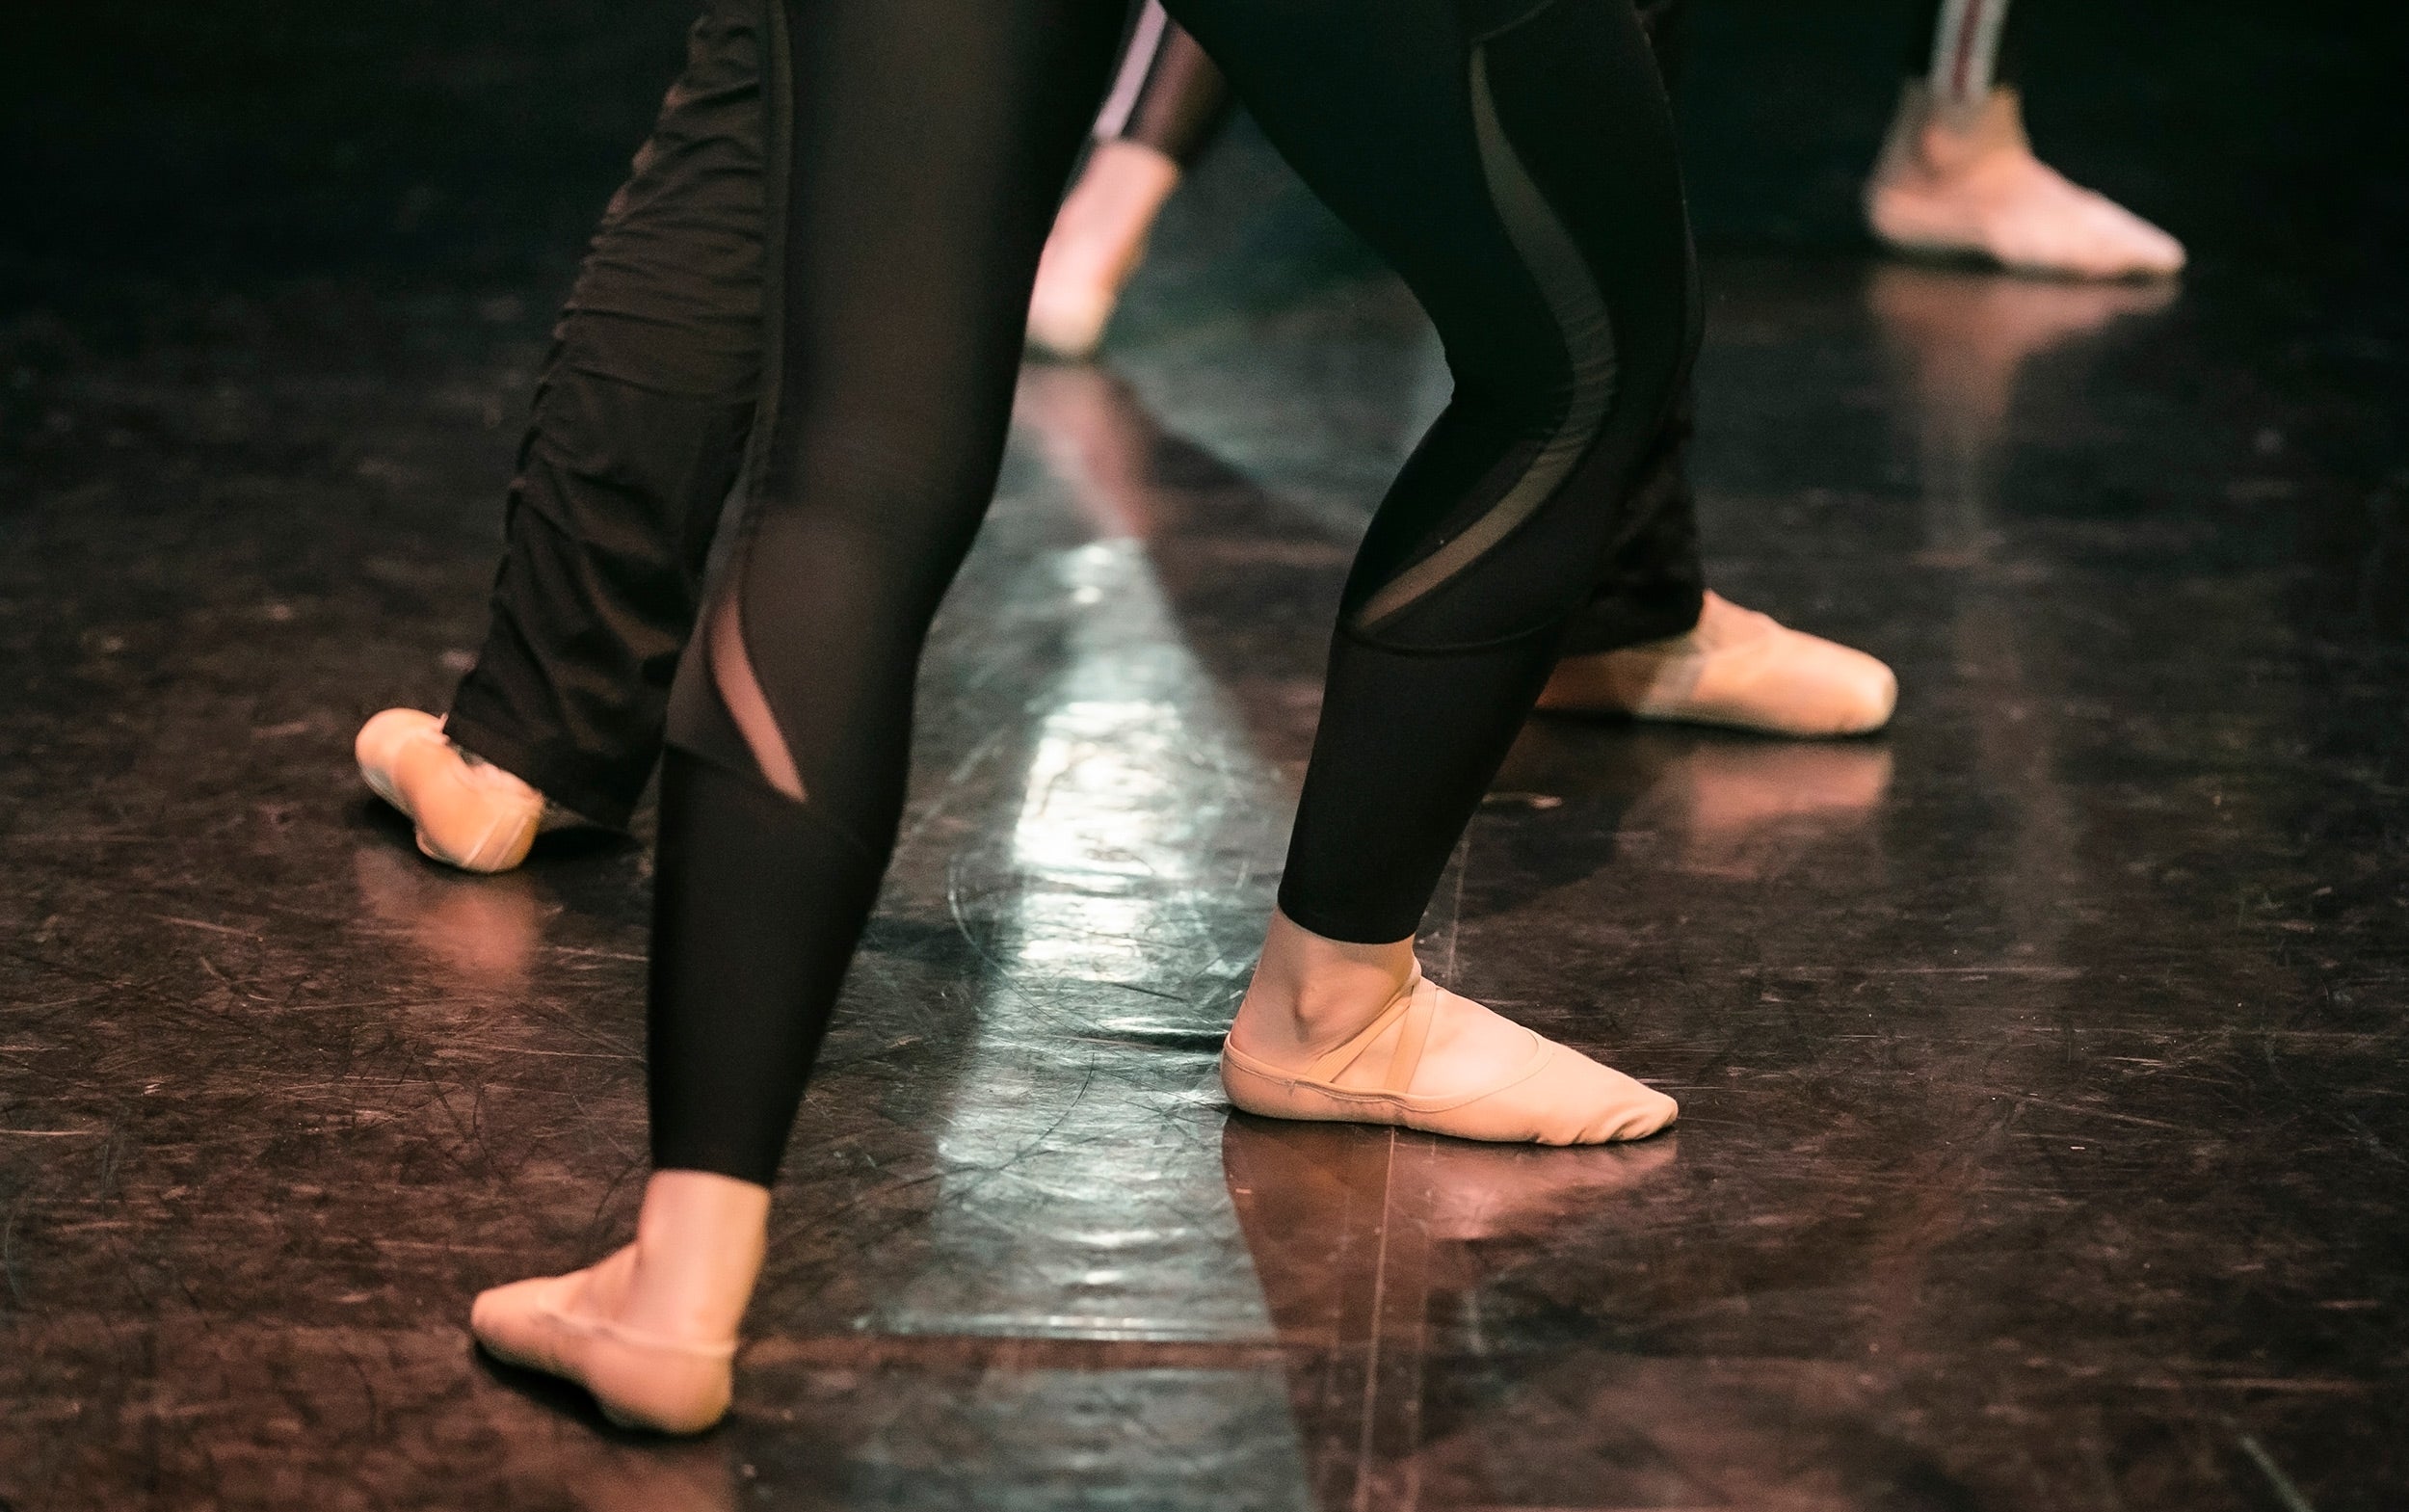 Detail of ballet dancers placing feet in fourth position.